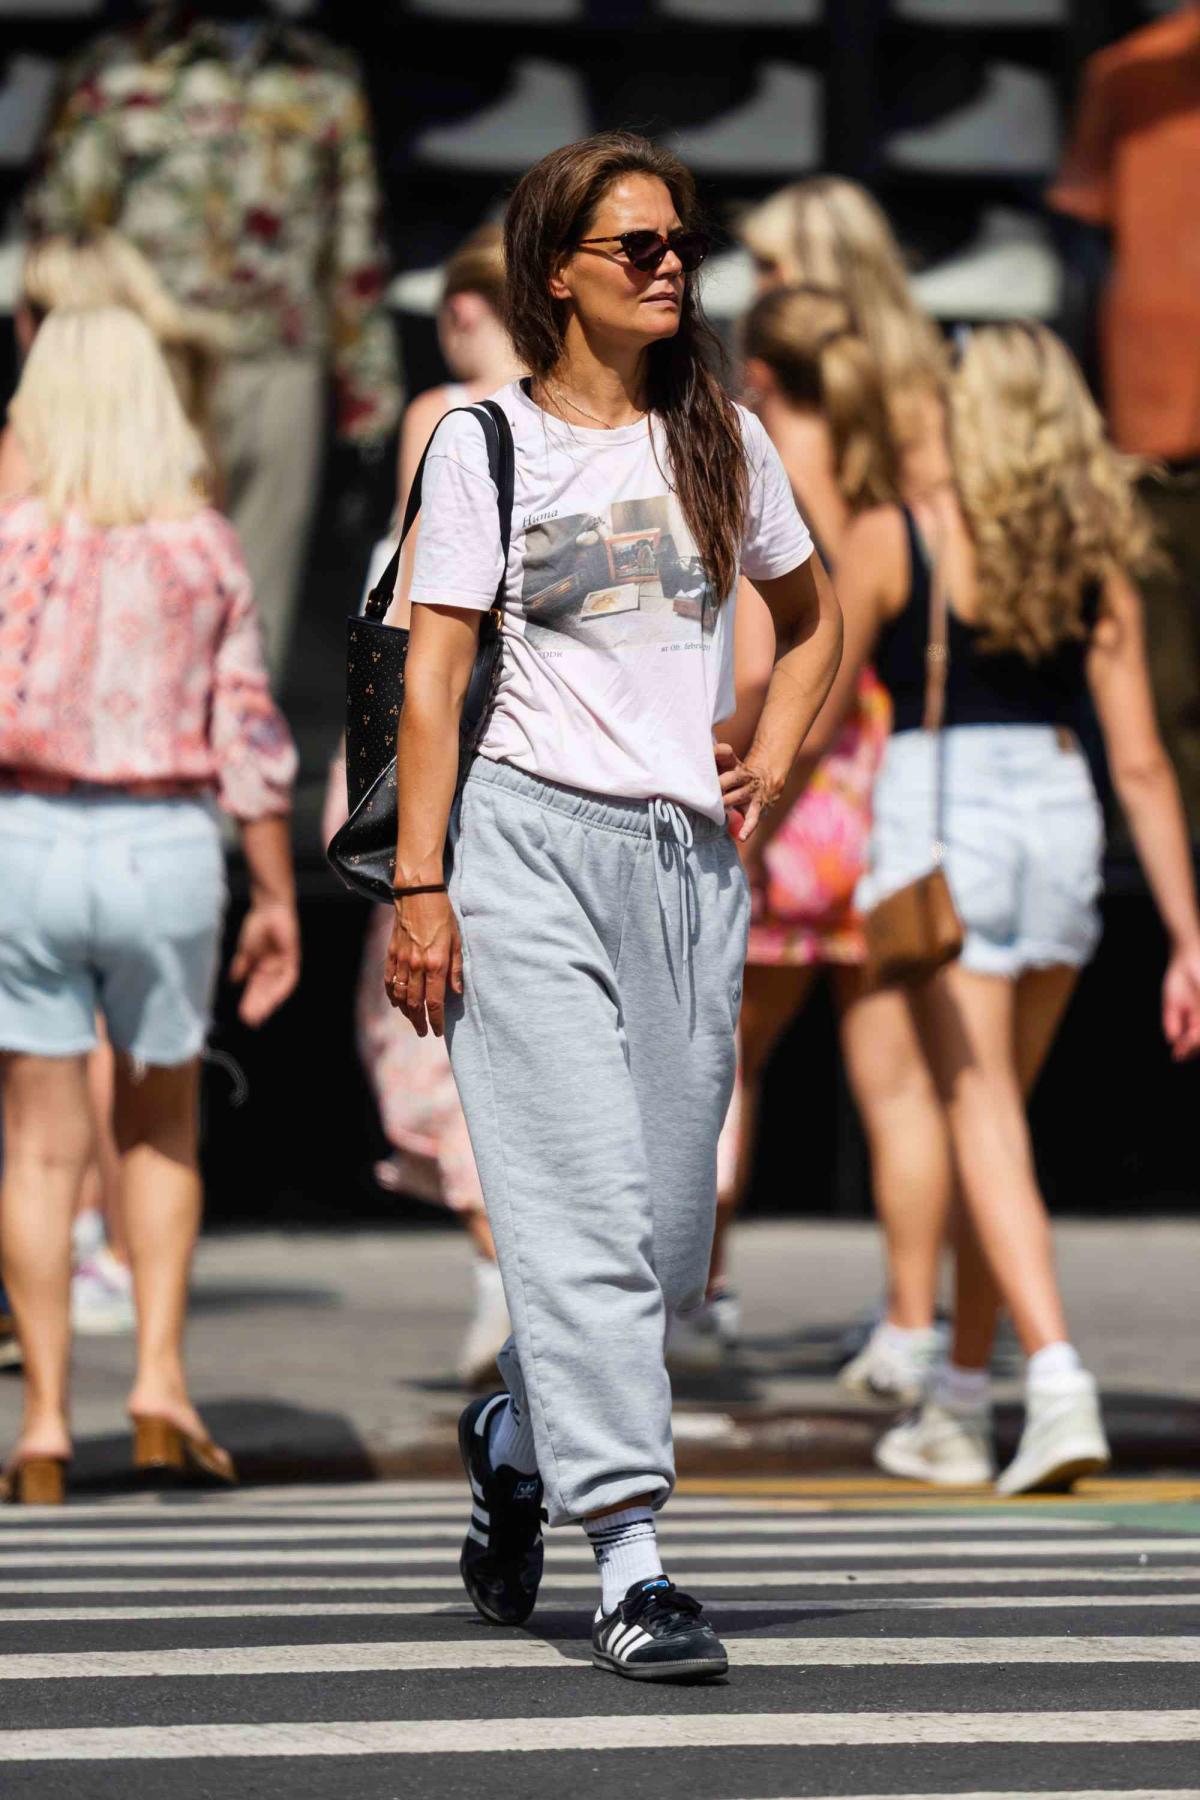 Shop 7 White Sneakers Worn By Celebrities: Katie Holmes, Emily